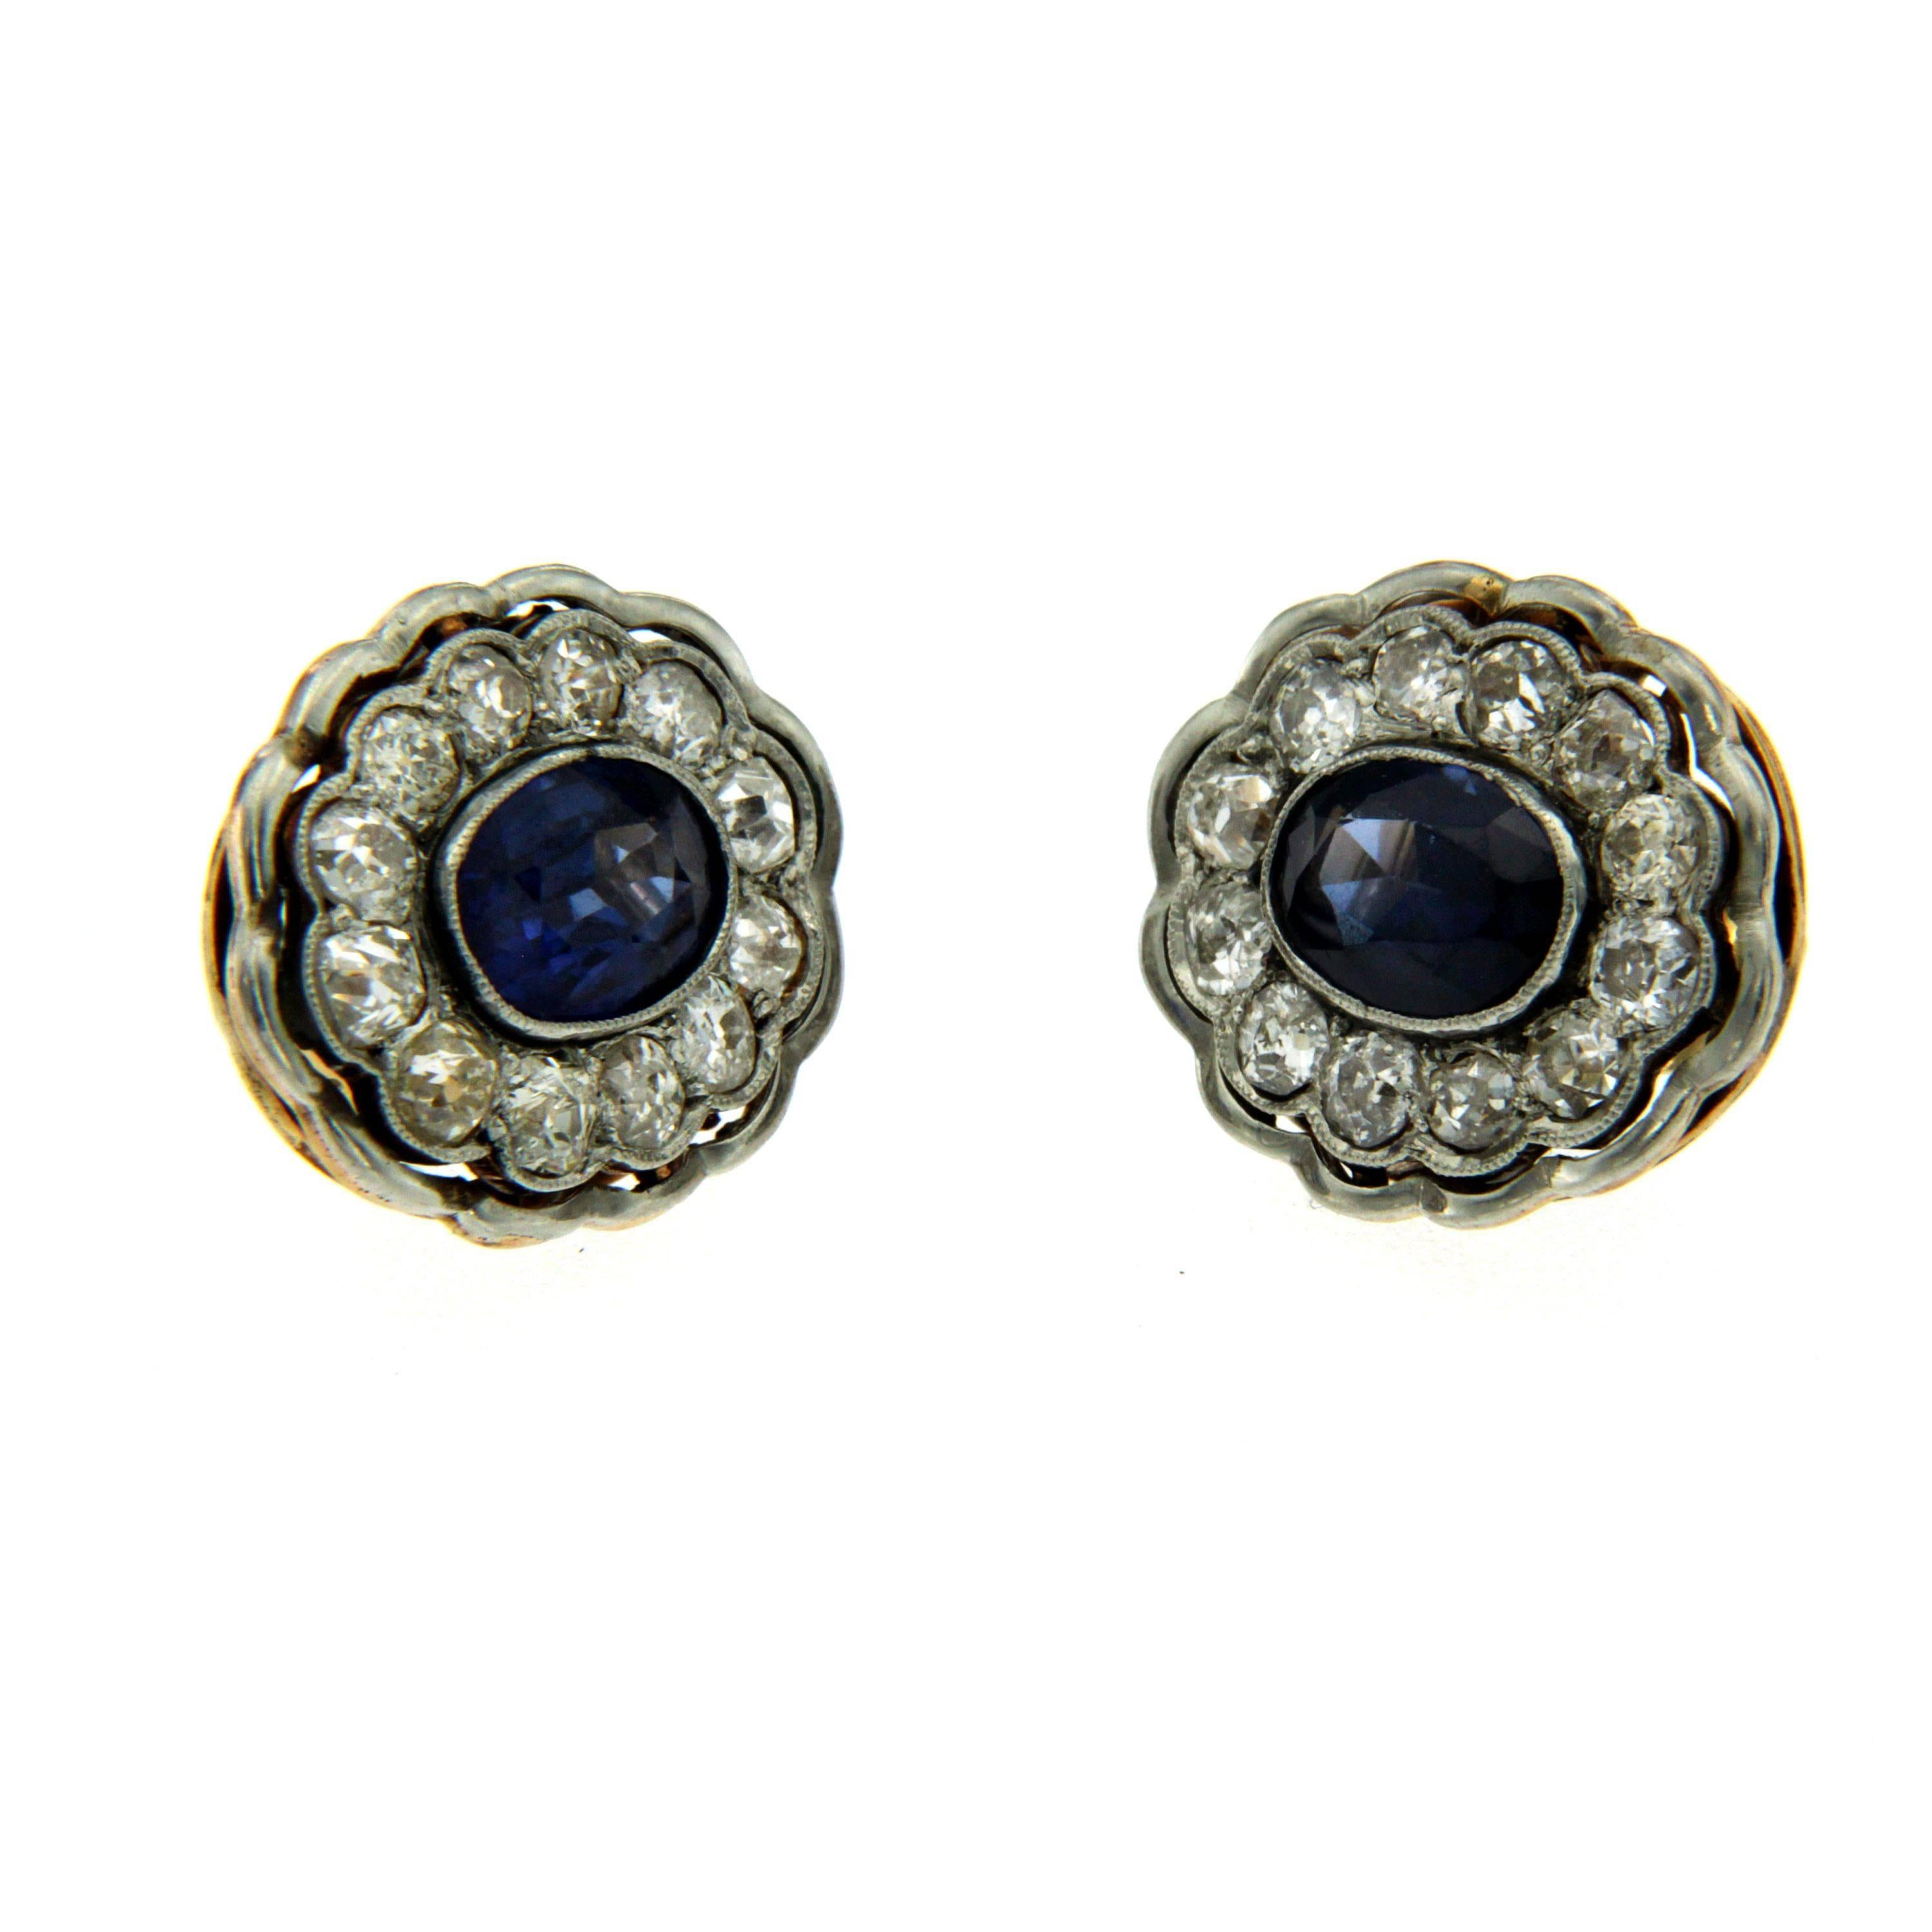 Victorian 18 karat gold Natural Sapphire and diamond earrings. These gorgeous sapphire and diamond clusters feature 2 center sapphires that are approximately 2.00 carats each along with an approximate total diamond weight of 3.00 carats old mine cut